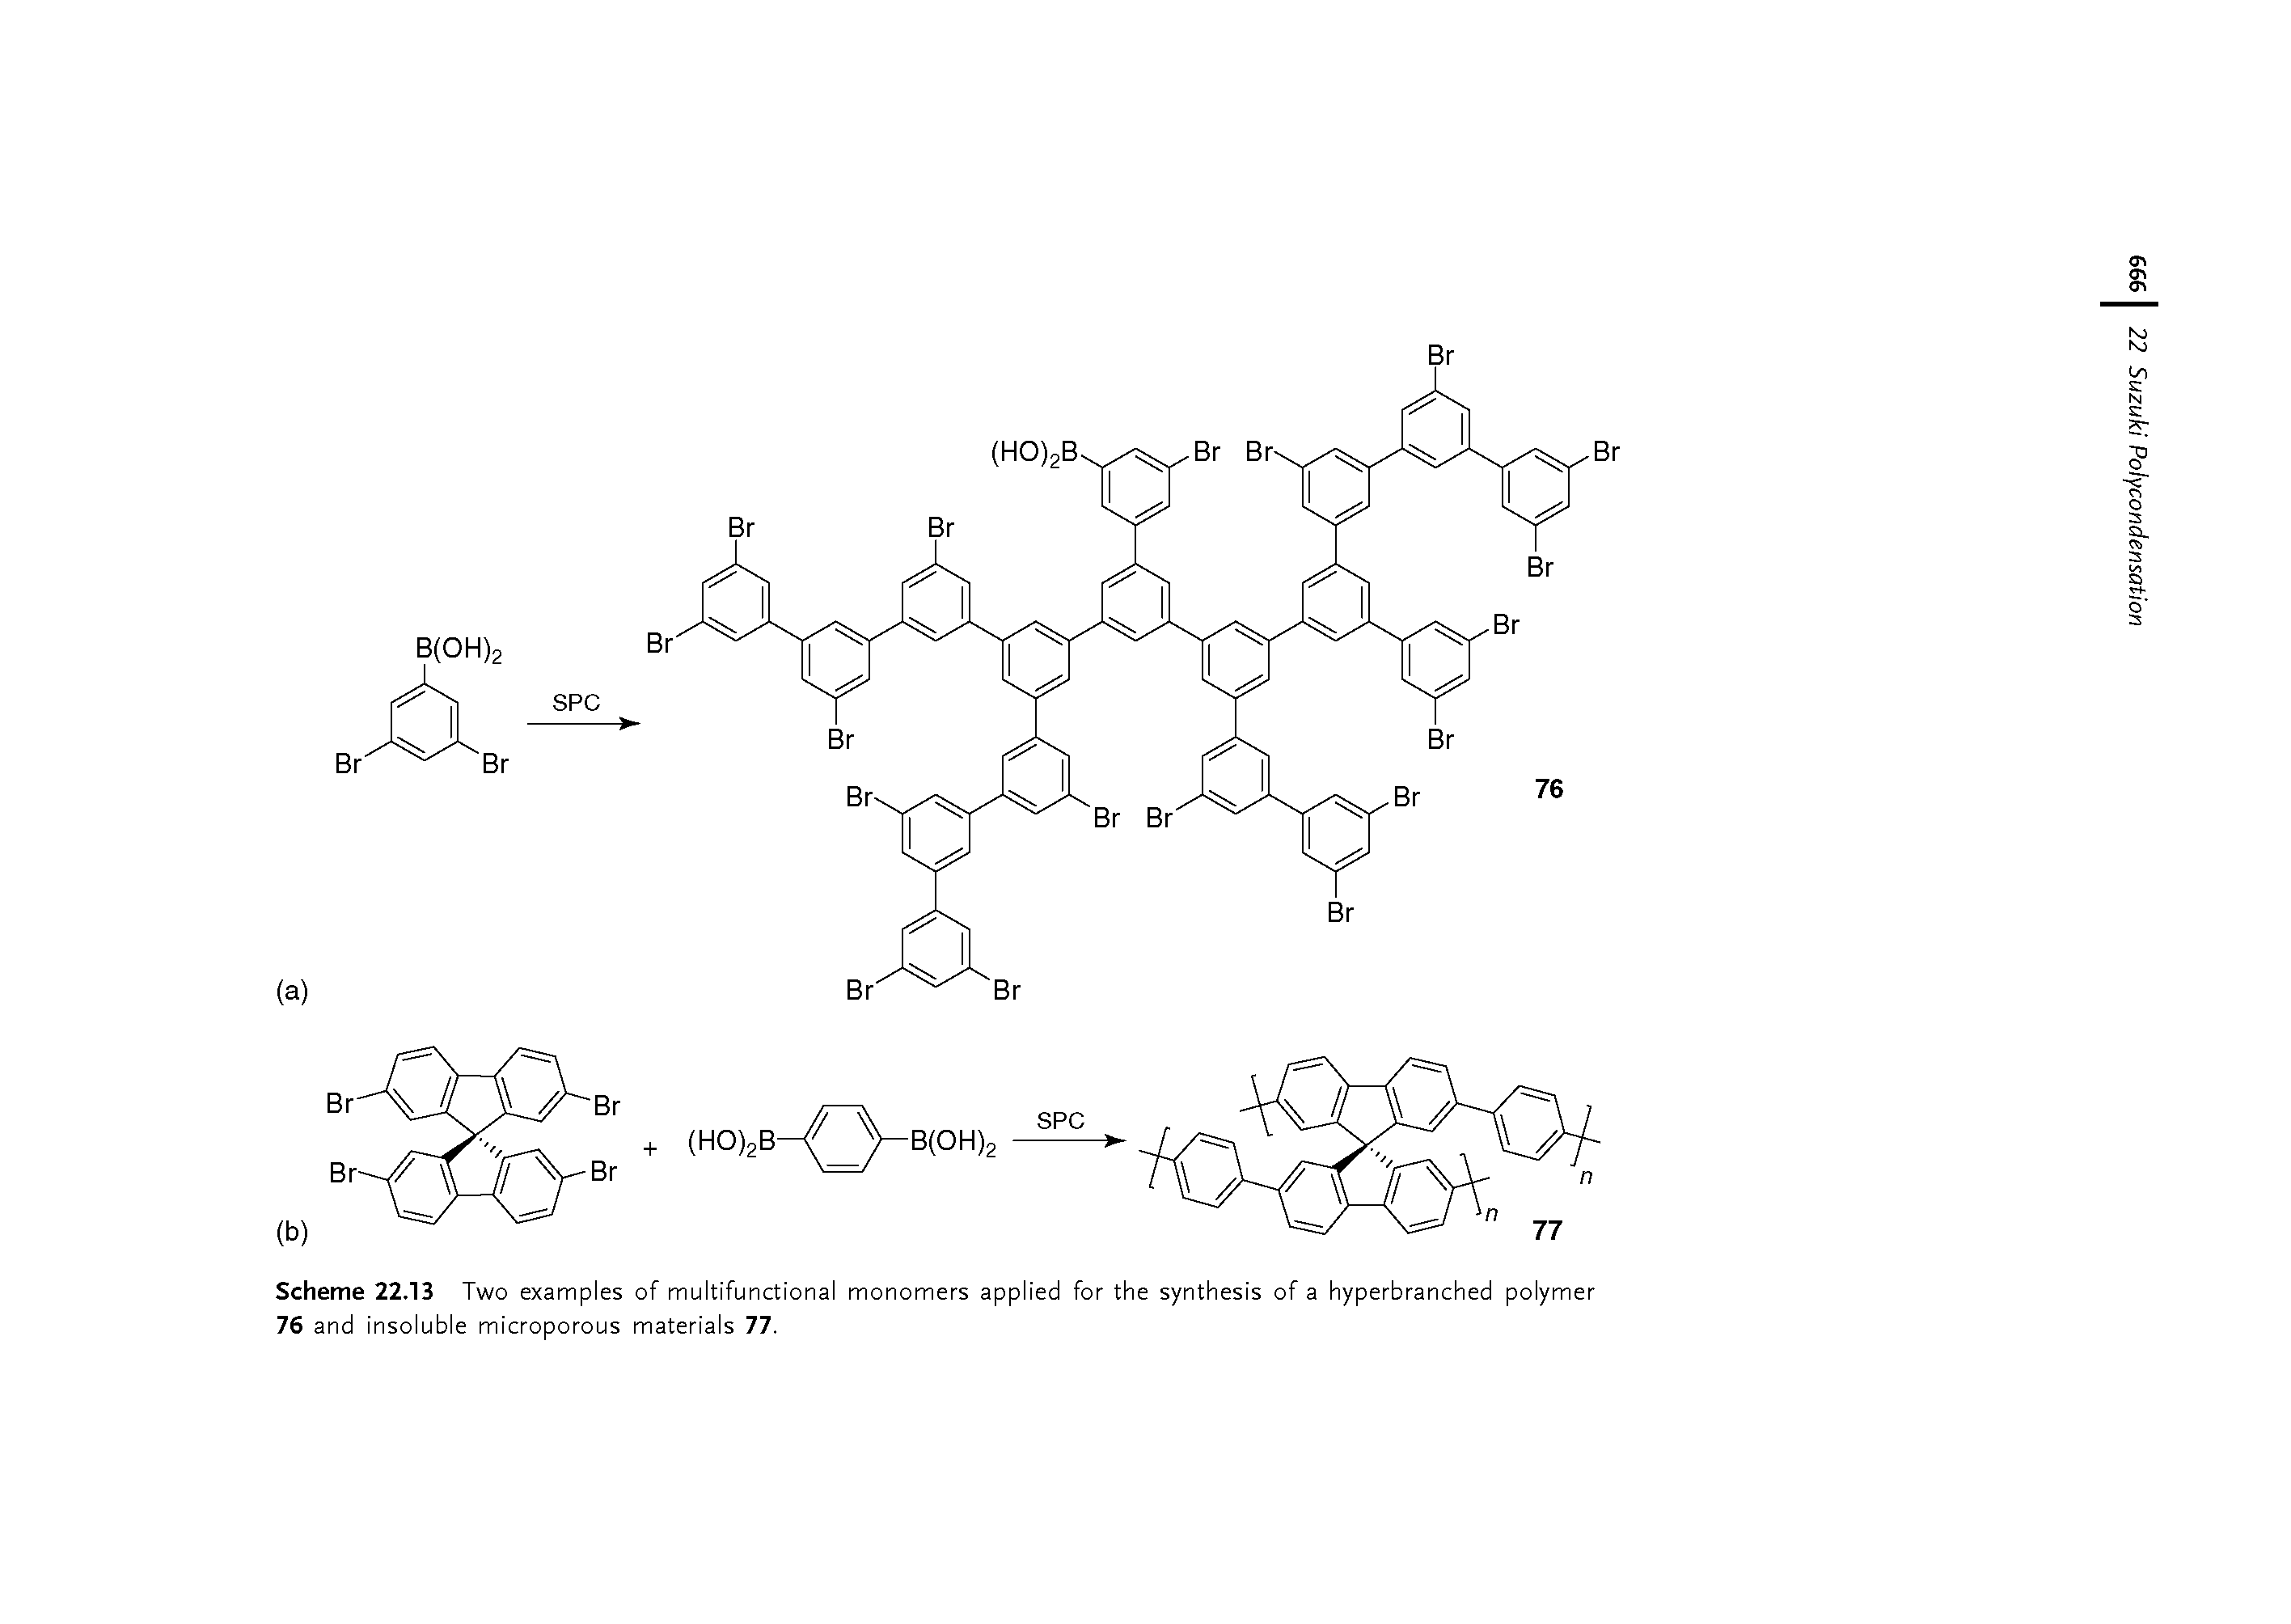 Scheme 22.13 Two examples of multifunctional monomers applied for the synthesis of a hyperbranched polymer 76 and insoluble microporous materials 77.